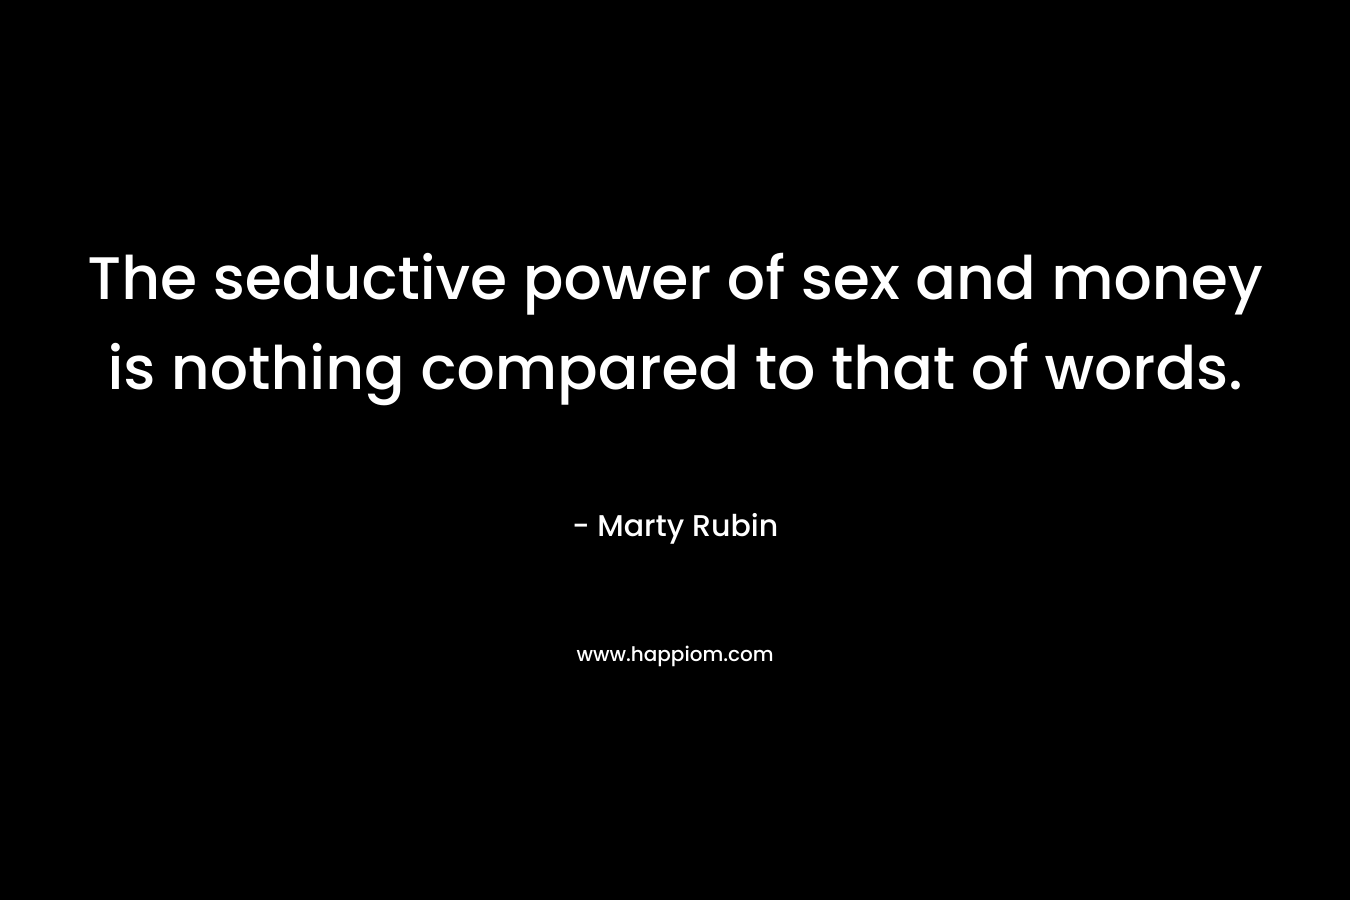 The seductive power of sex and money is nothing compared to that of words.